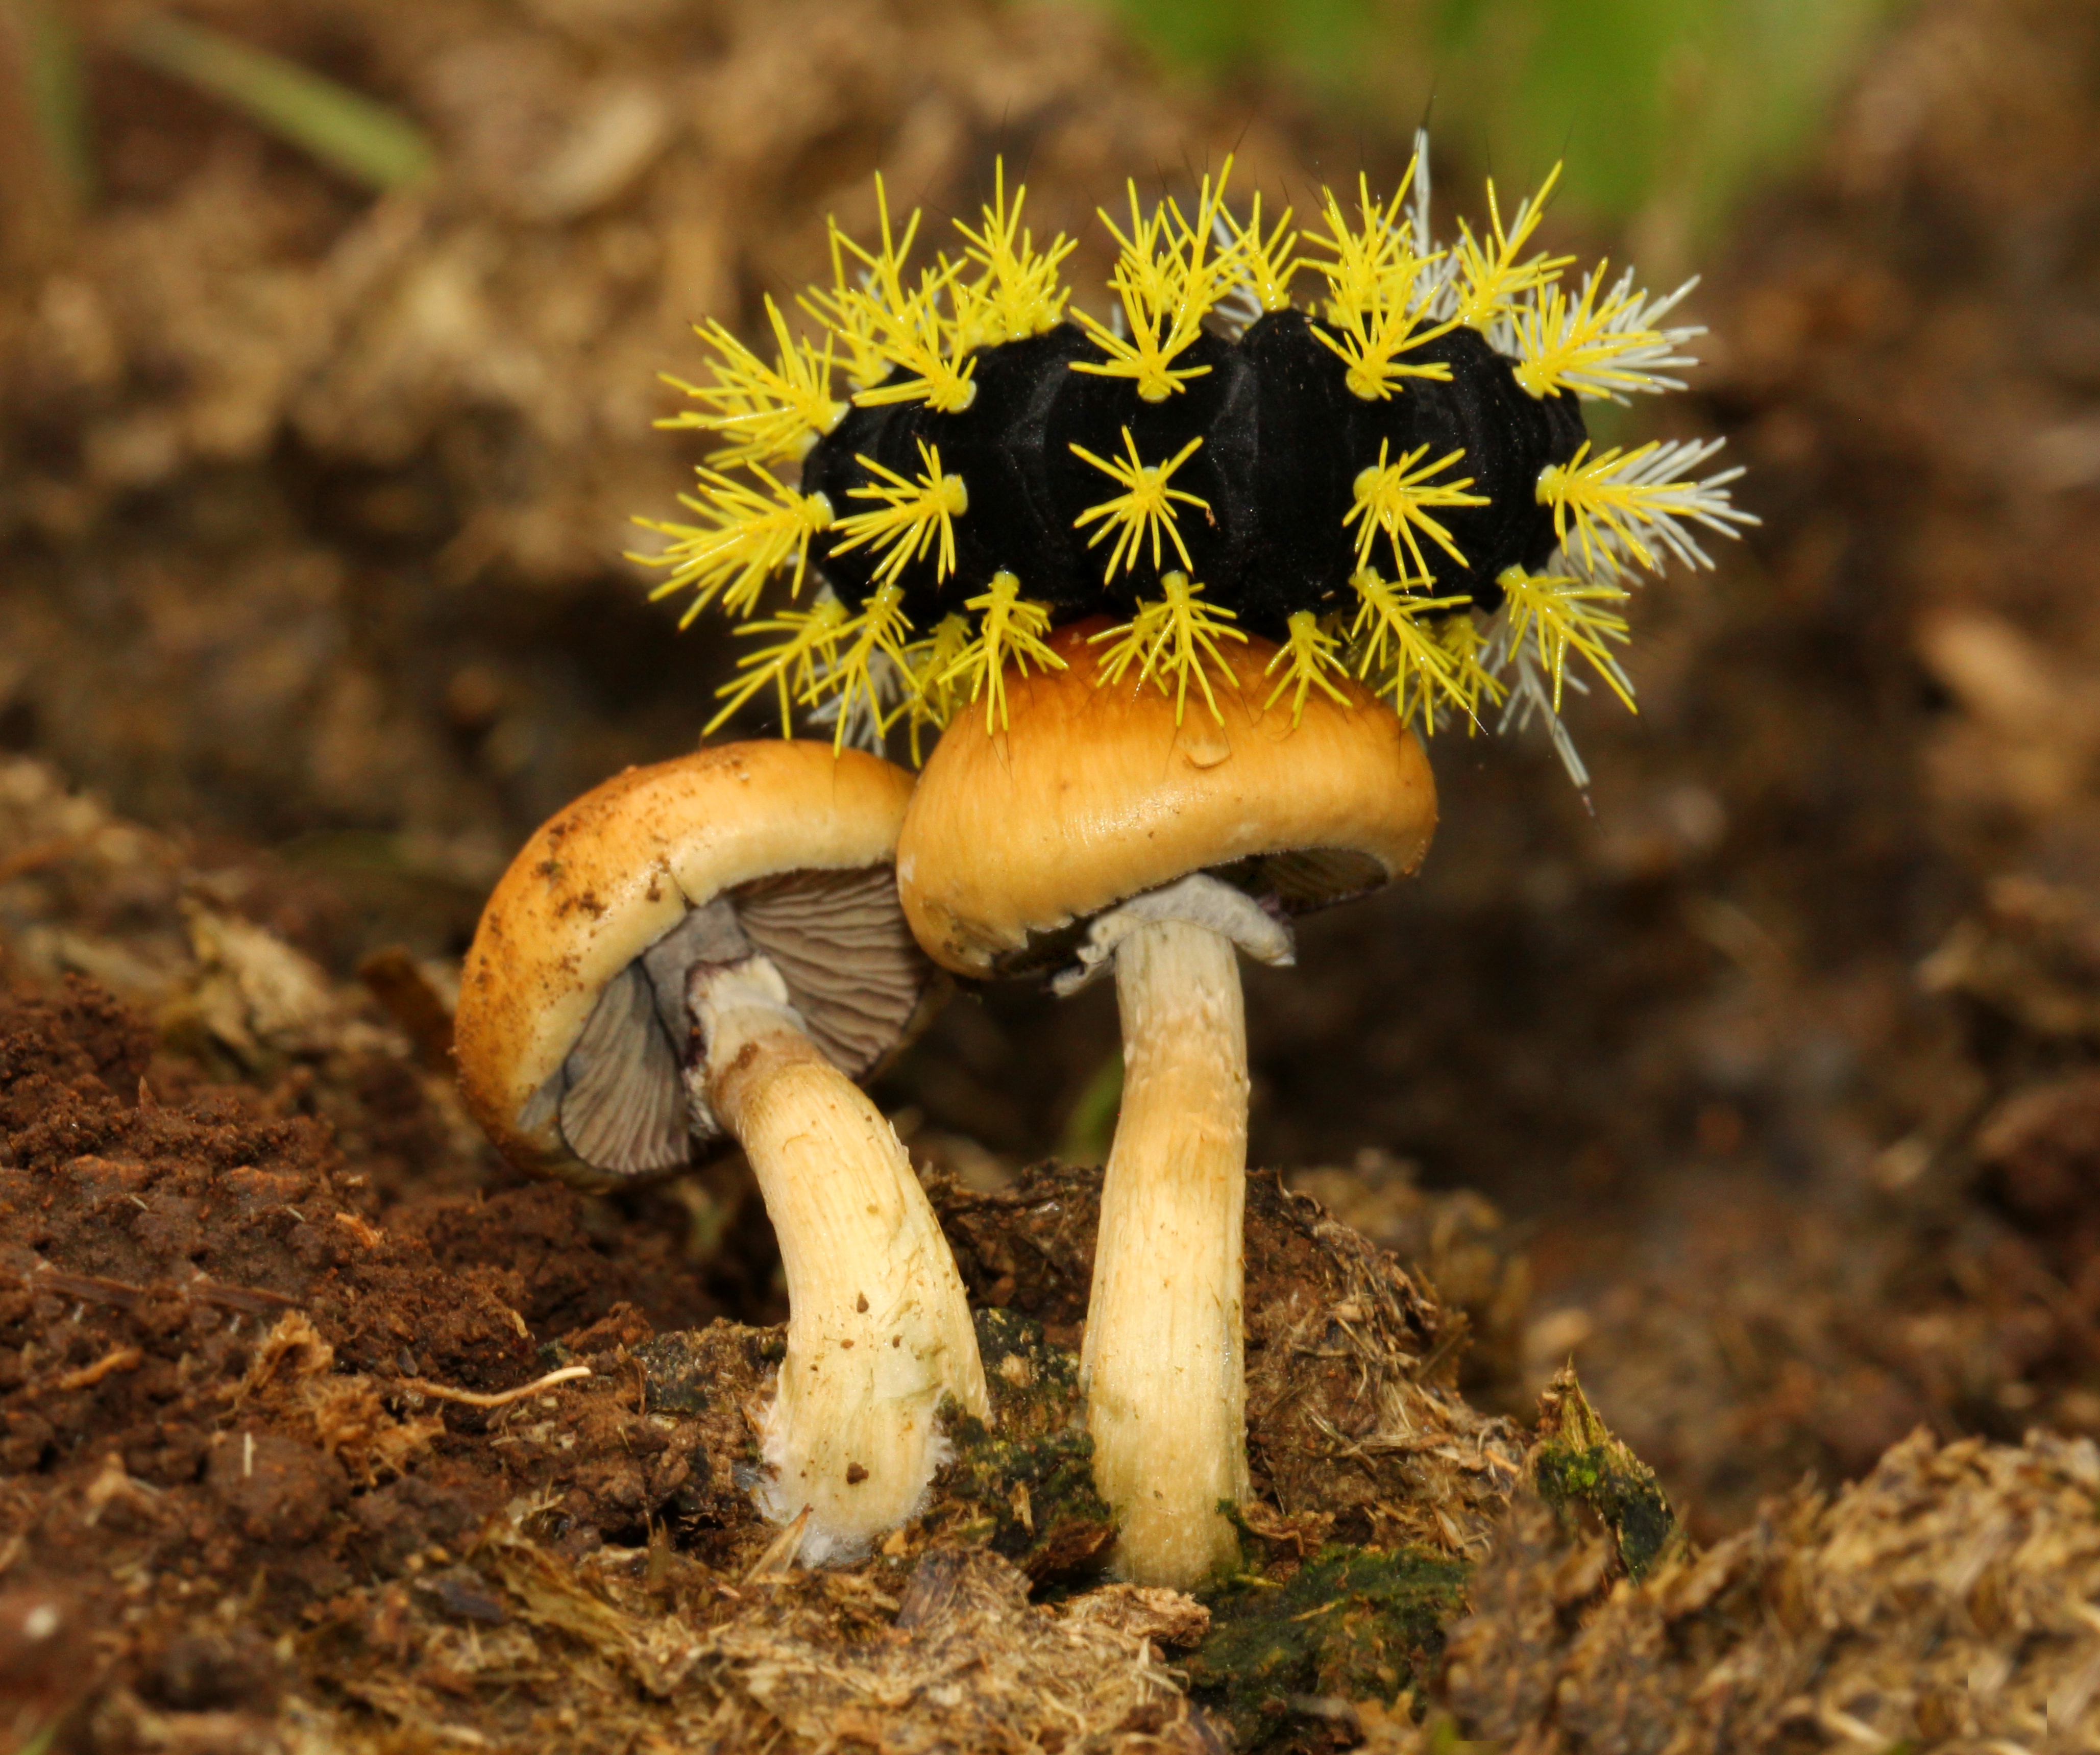 Psilocybe cubensis, a mushroom that contains psilocybin, with a yellow-and-black caterpillar